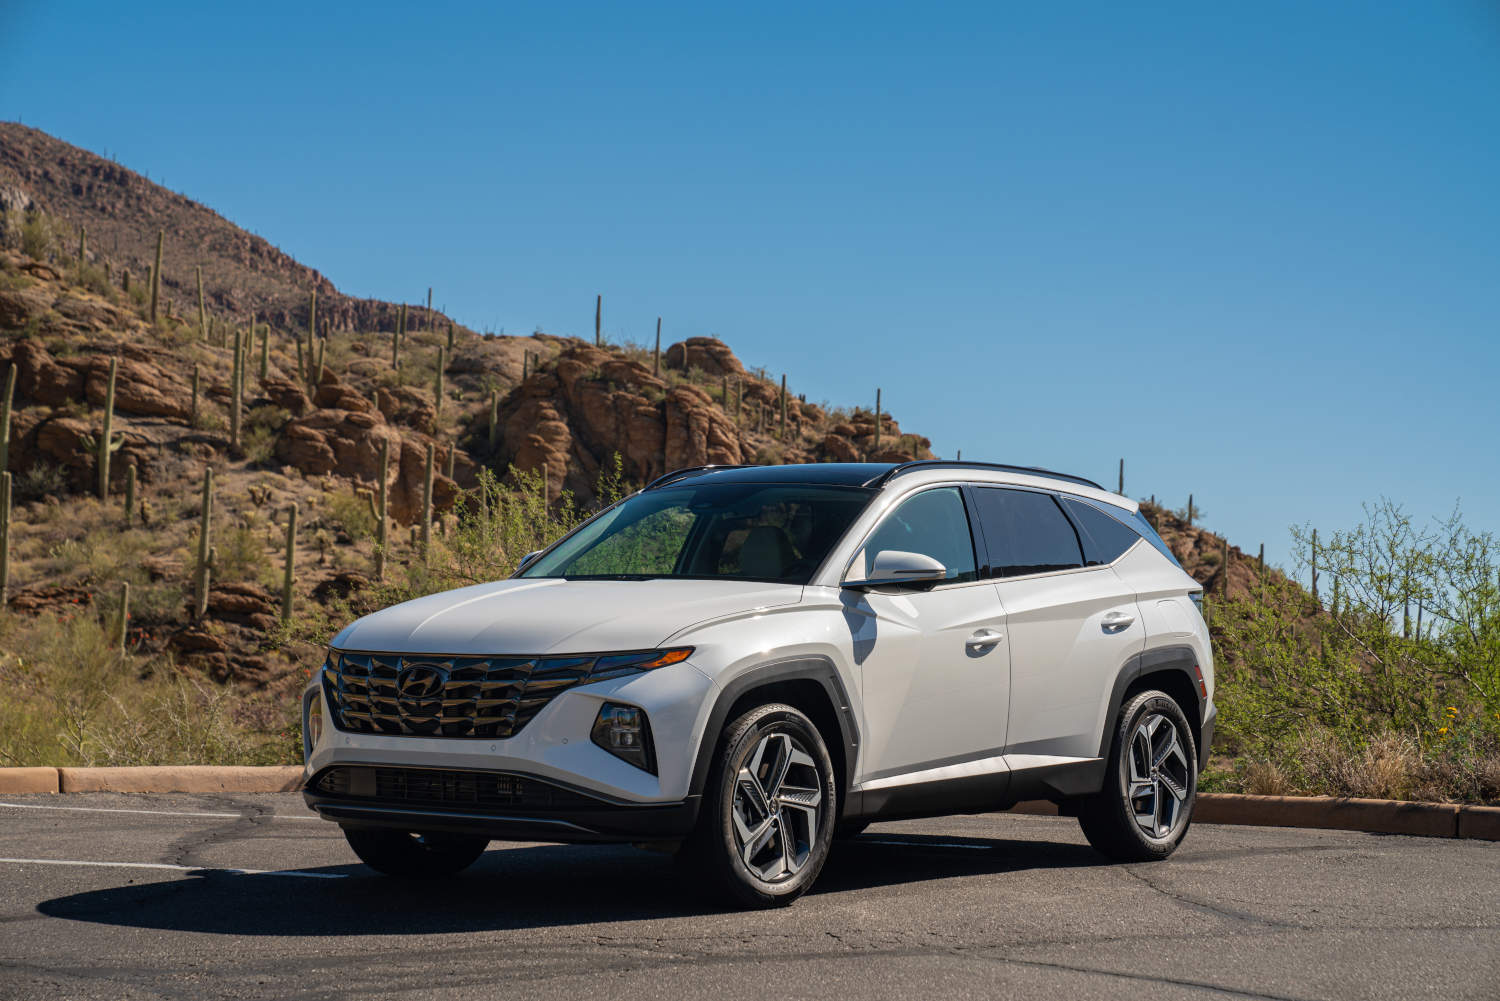 The best small SUVs include this 2023 Hyundai Tucson